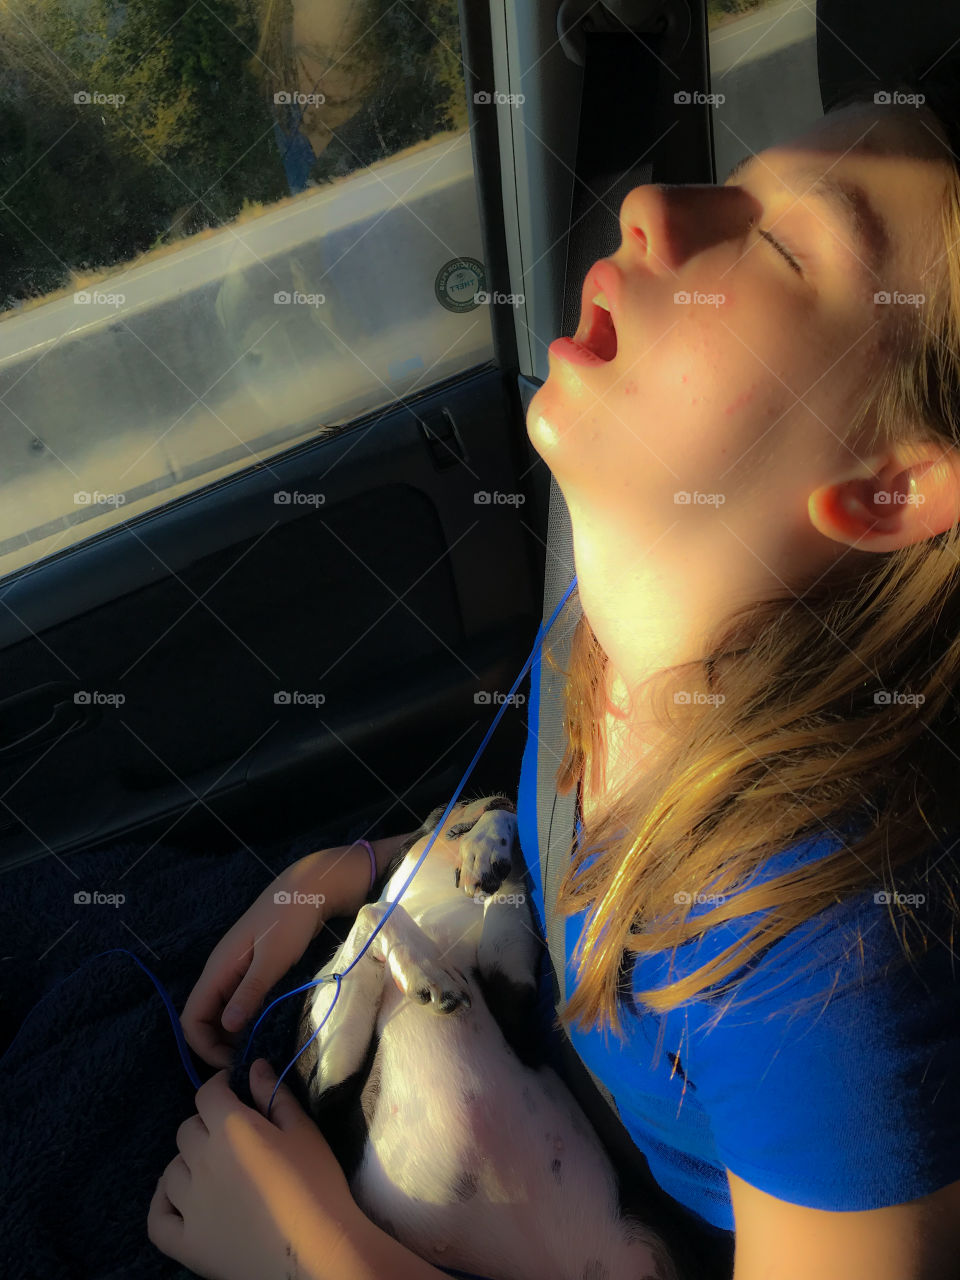 My favourite moments are primarily about my family and stolen unexpected moments. Here my youngest has fallen asleep because vacation wore her out!! Probably the snoring dog didnt help either! 